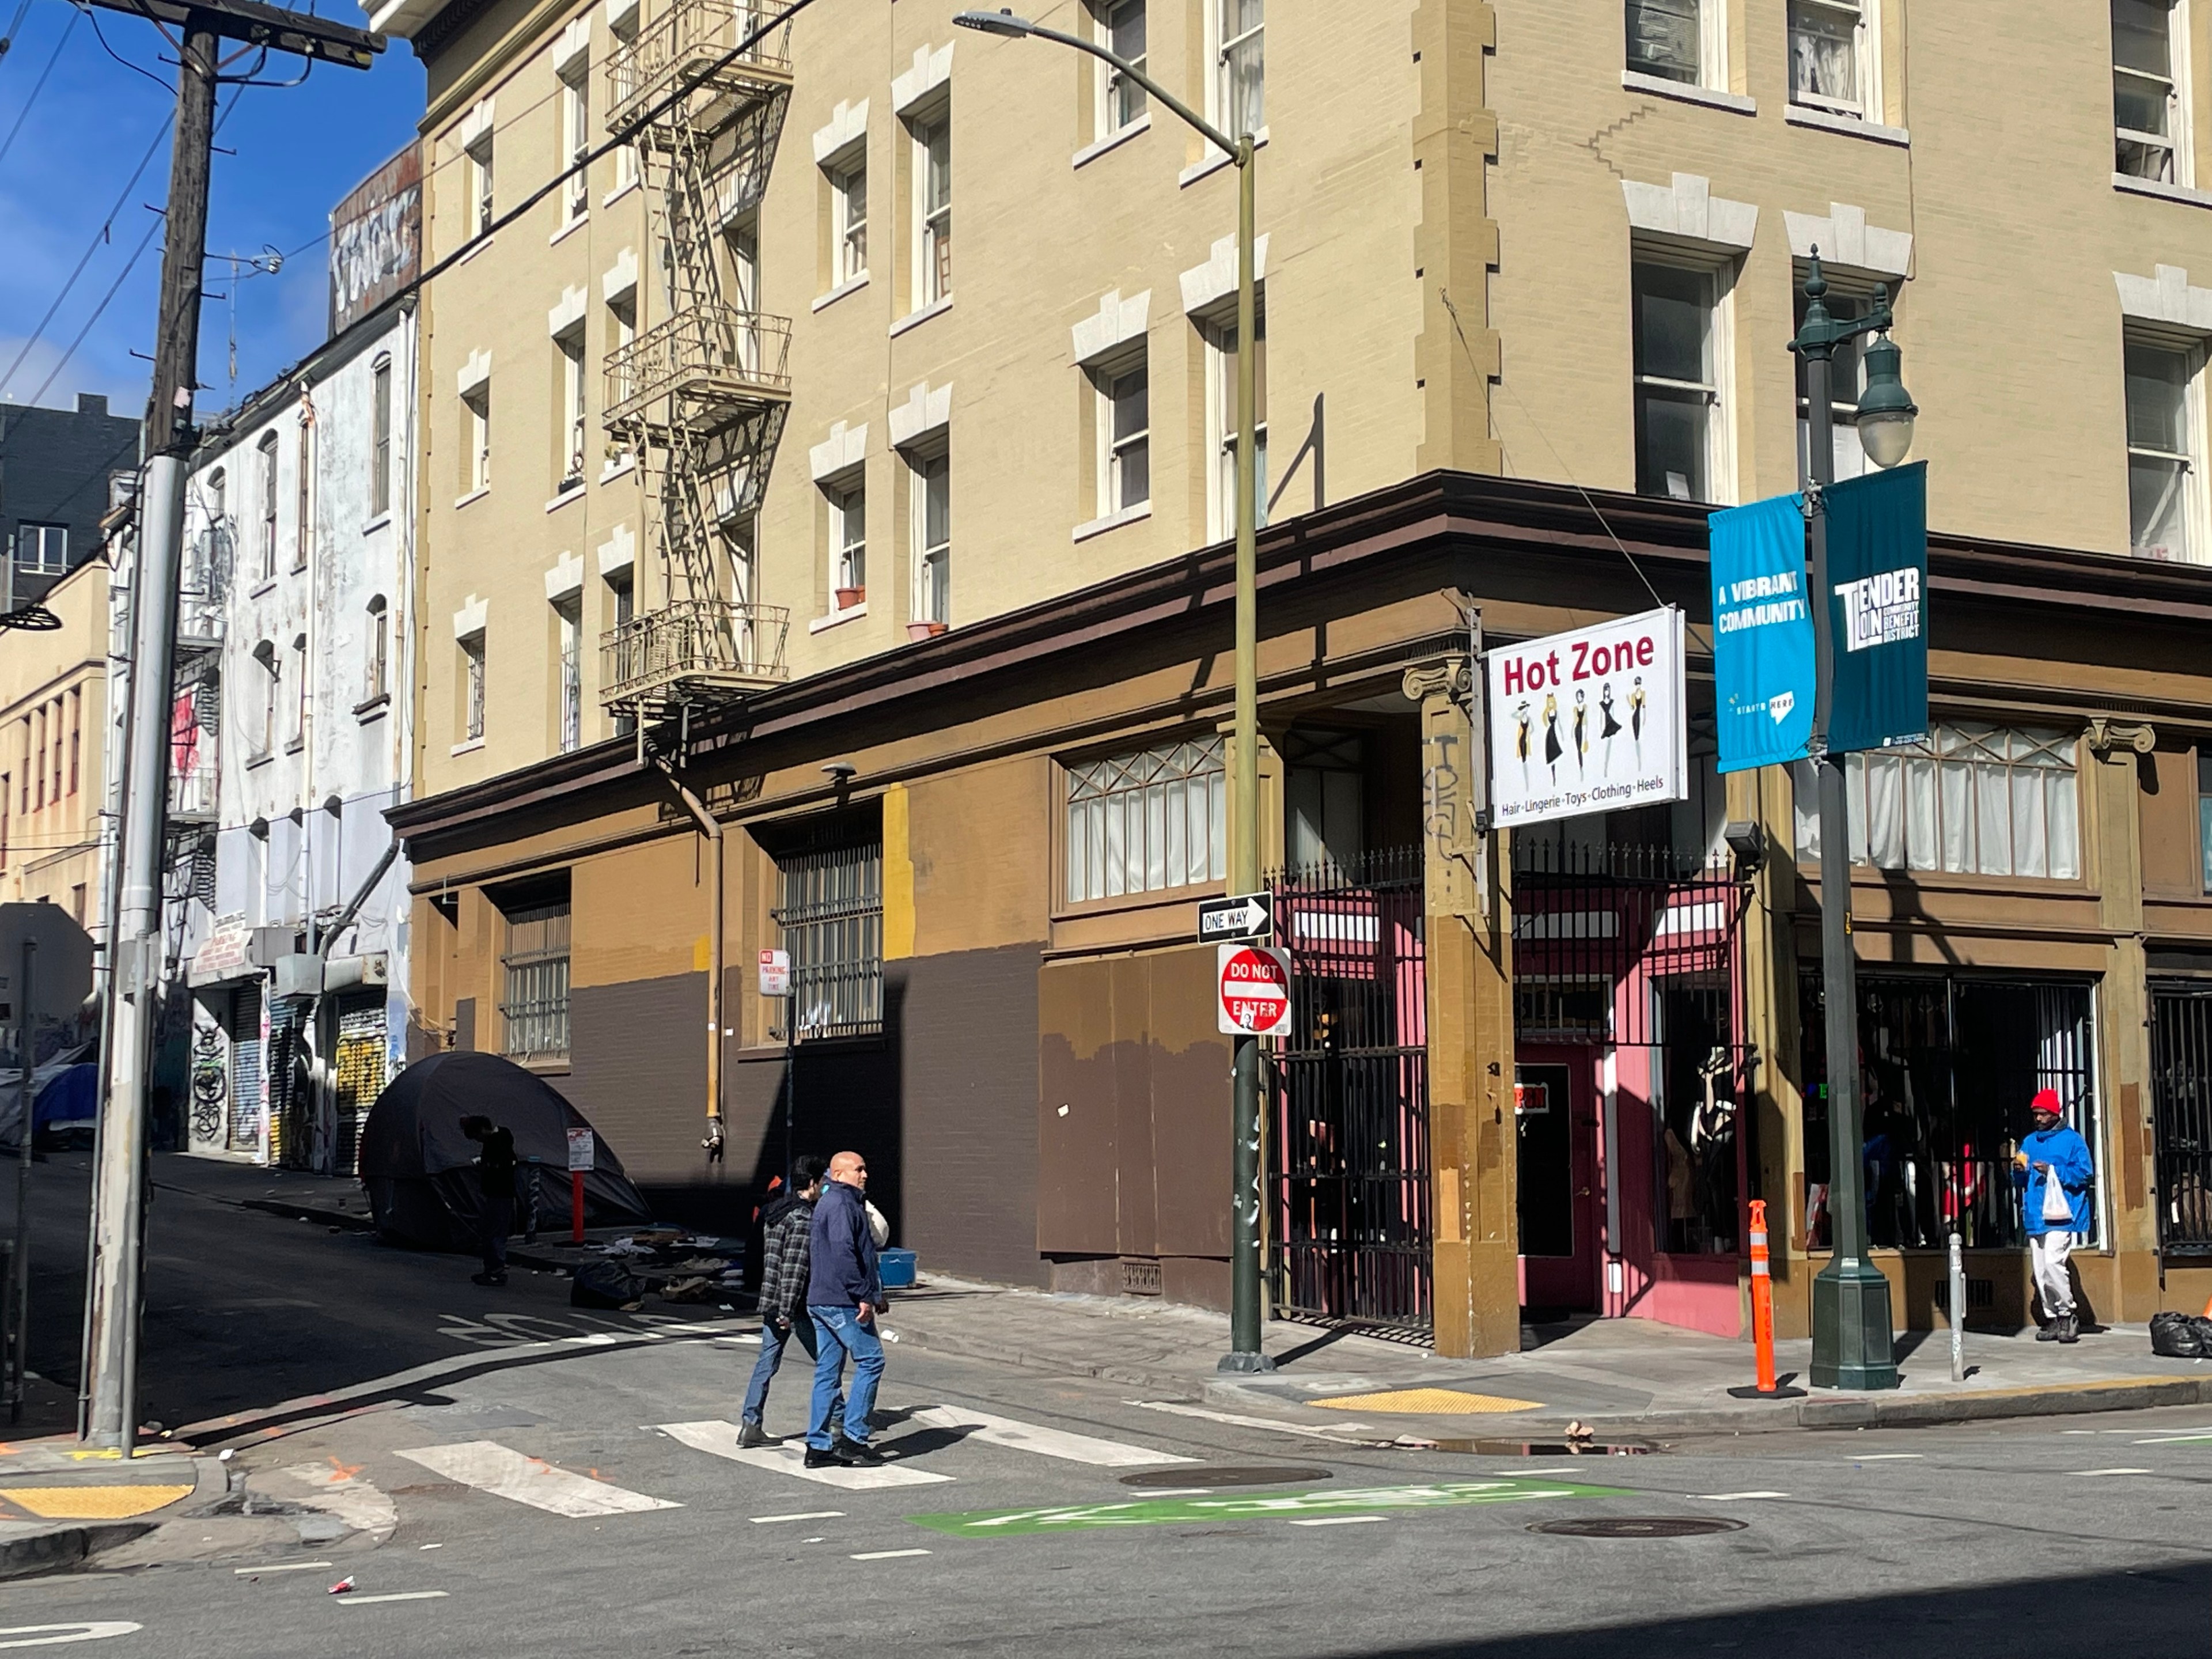 A sunny street corner with people, a yellow building, fire escapes, banners saying "Hot Zone" and "Vibrant Community," plus a film crew tent.